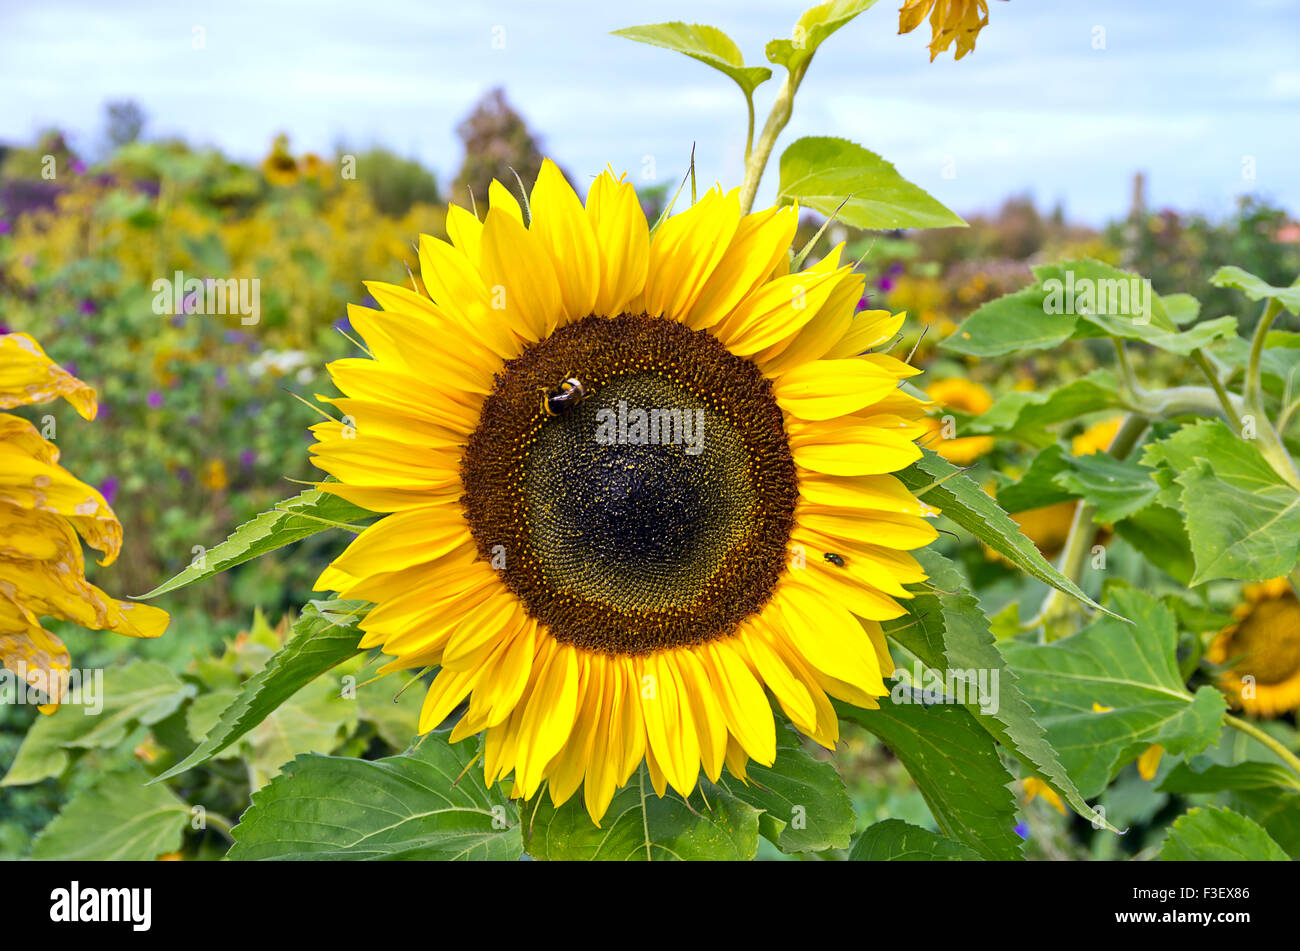 A single sun flower and bumble bee. Stock Photo